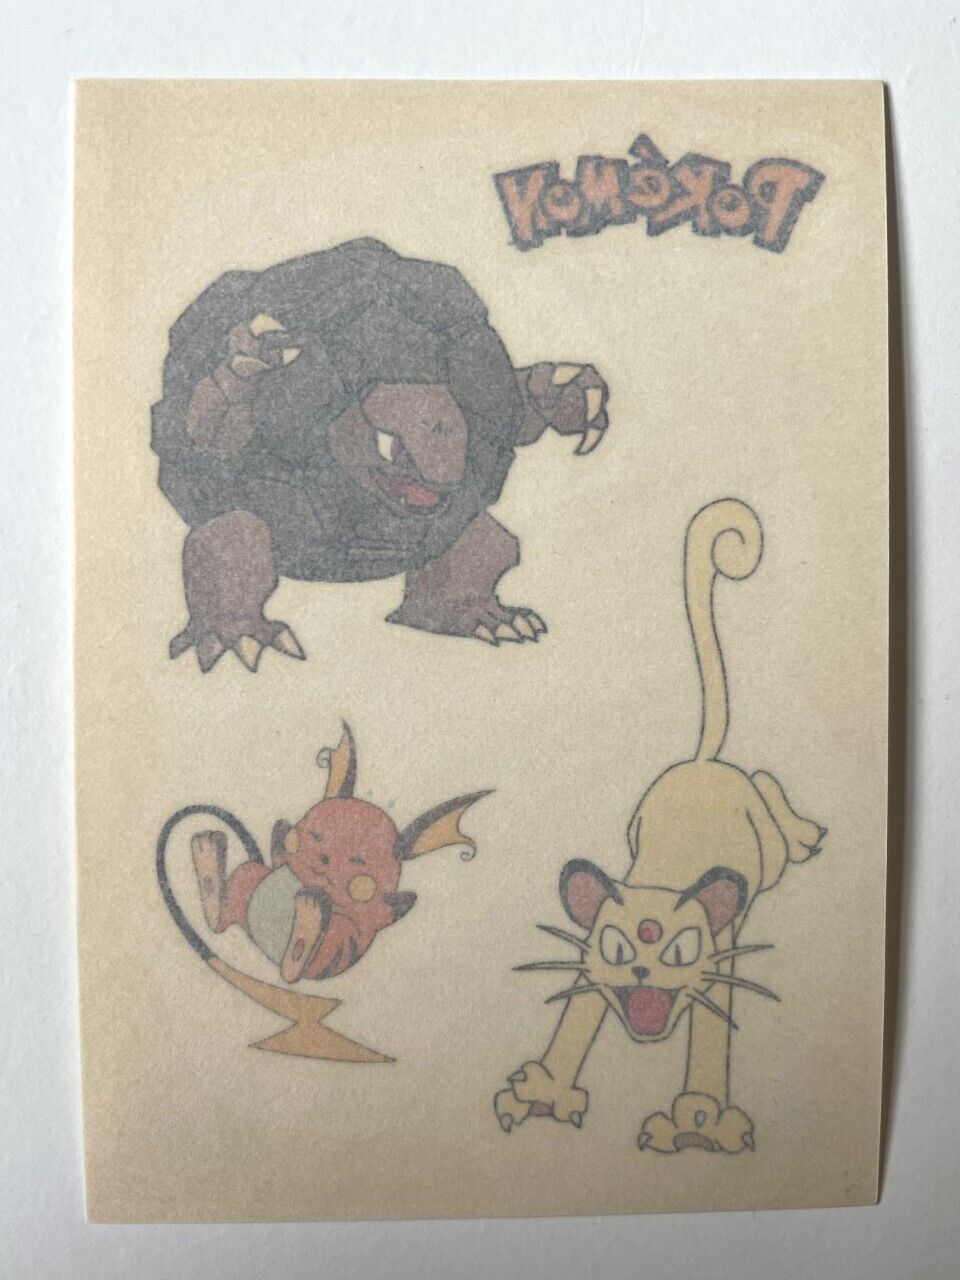 Pokemon Temporary Tattoos Merlin 2000 - All 1-20 to choose from - Rare Vintage -